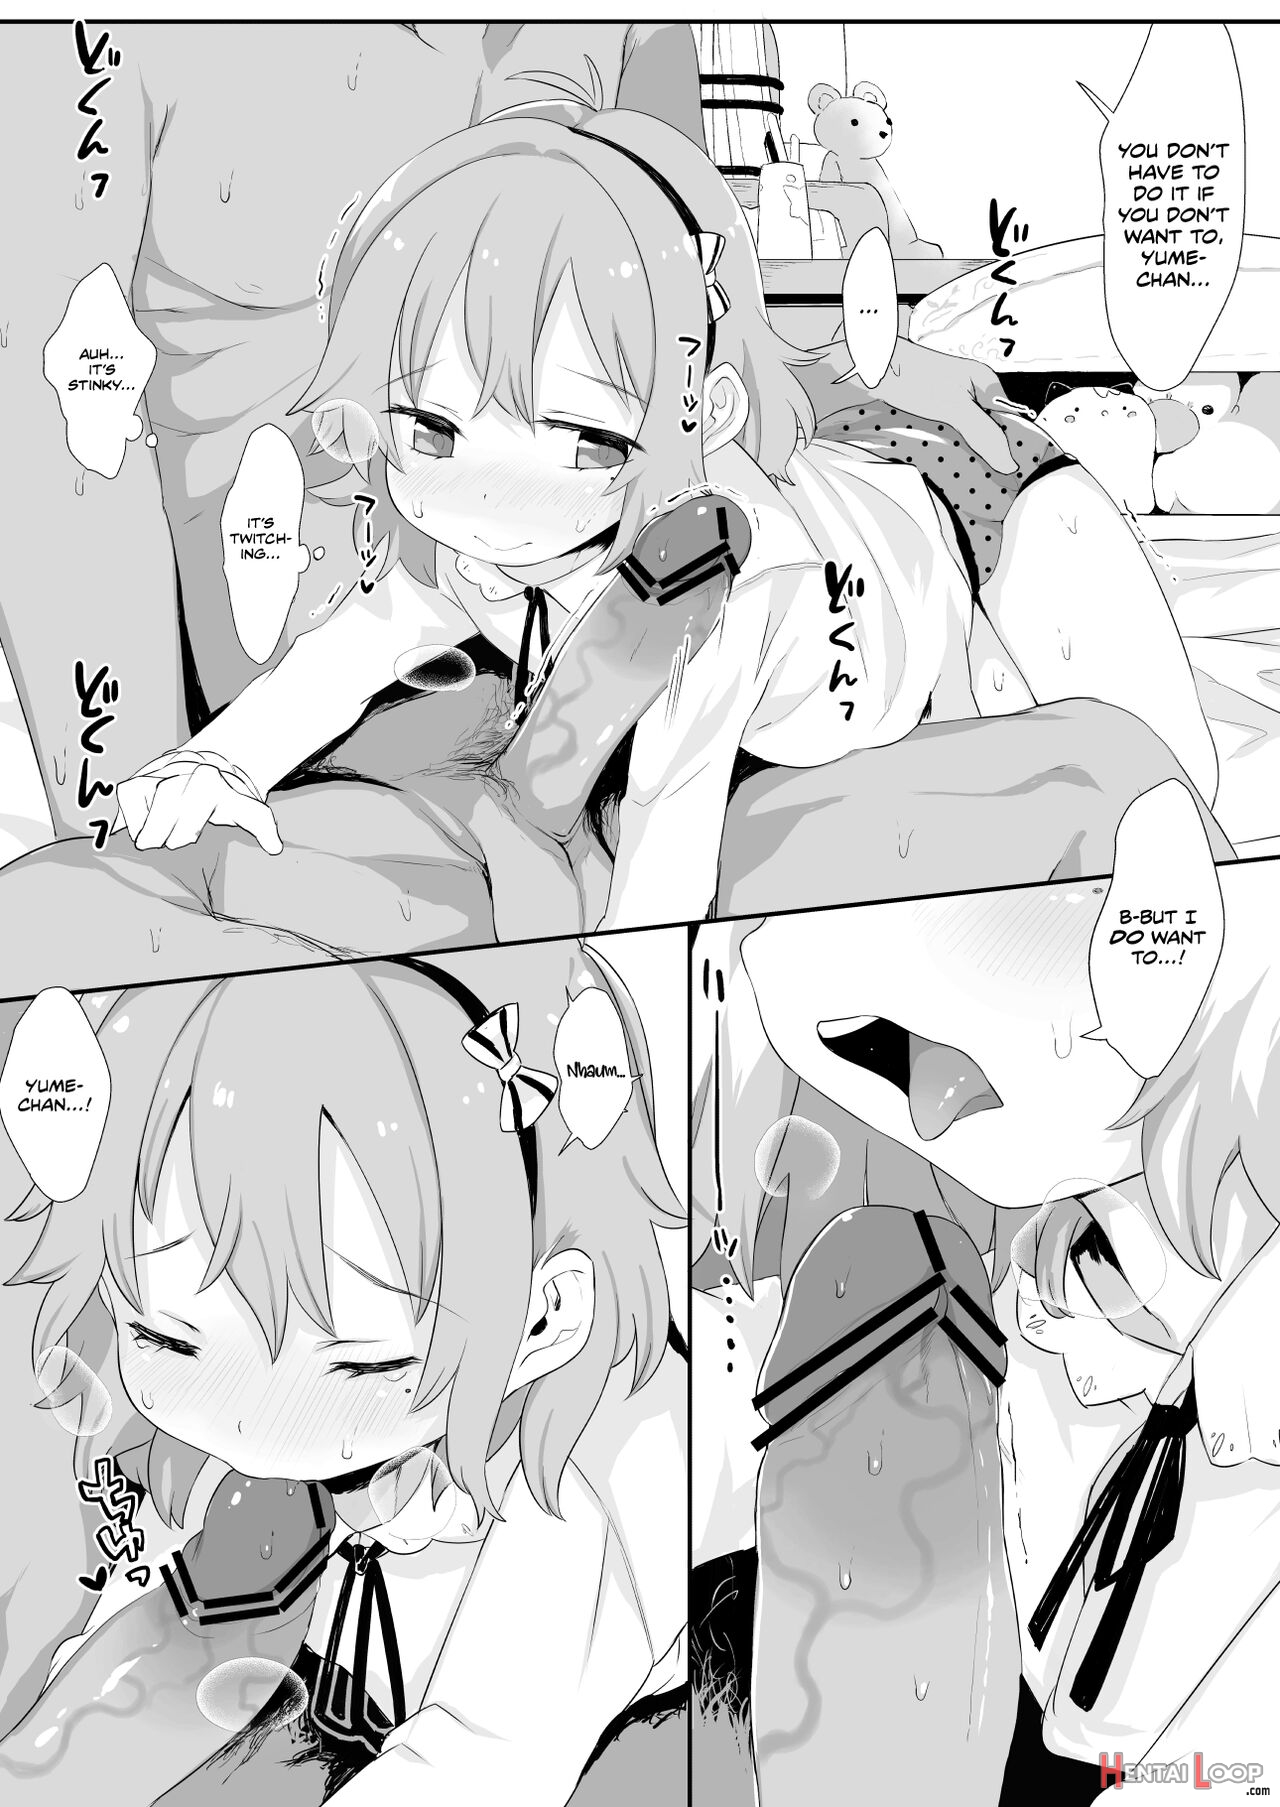 Hot 'n Steamy Babymaking Sex With Yume-chan! page 8